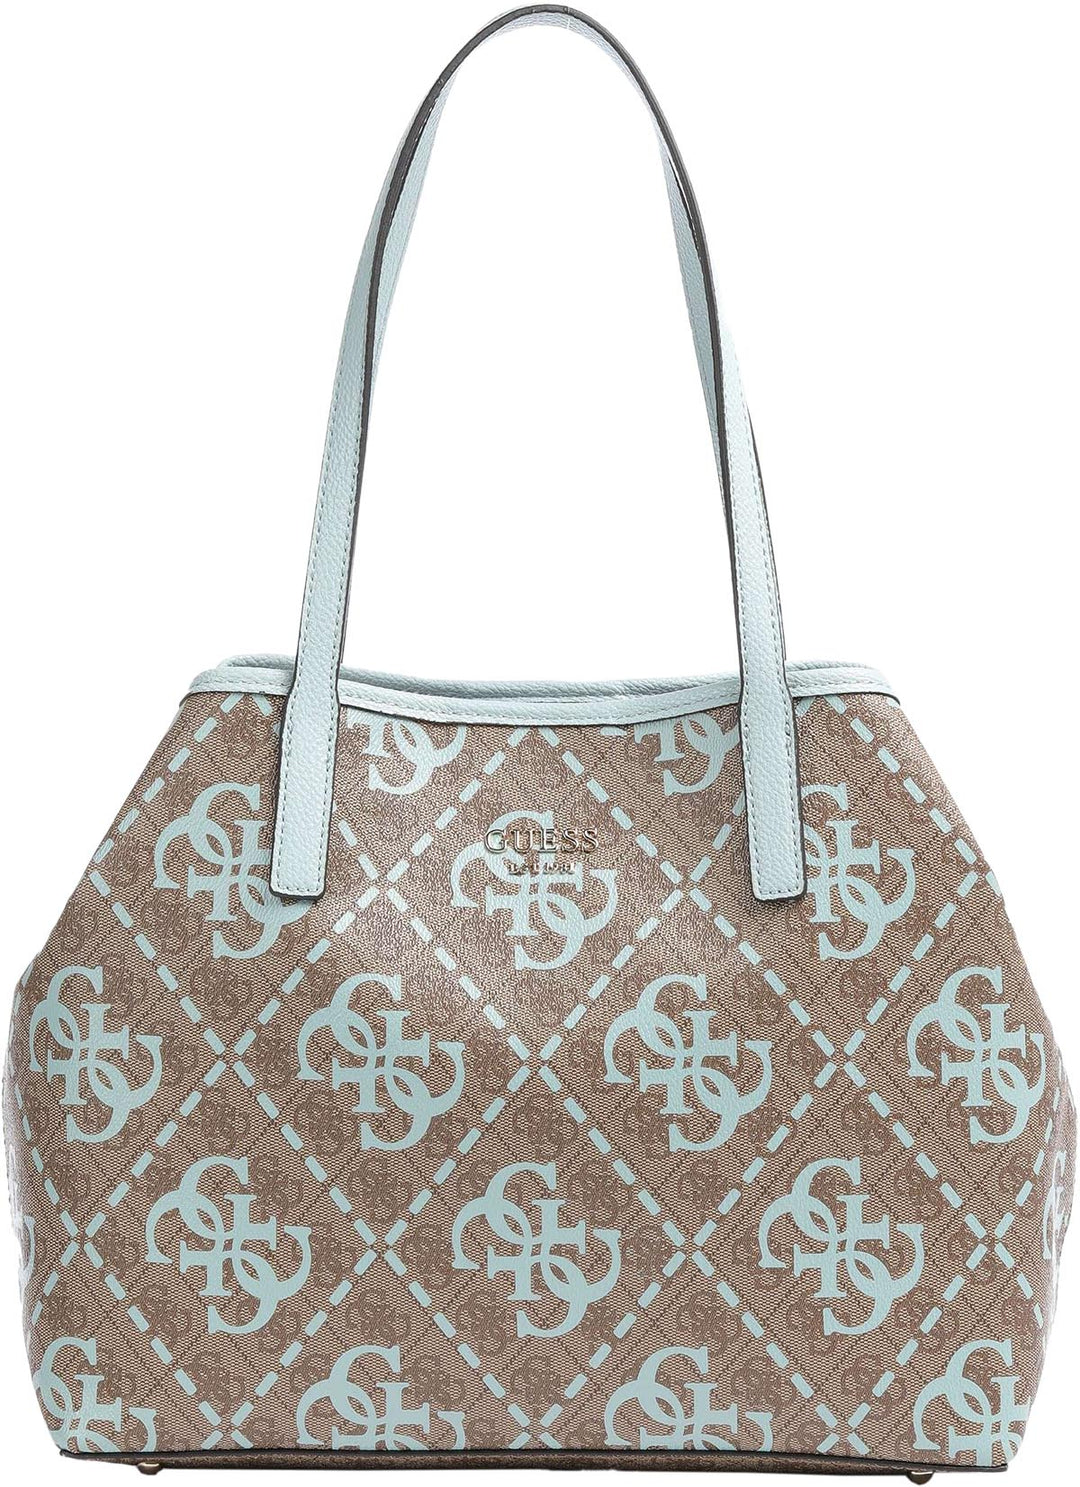 Guess Women's Vikky Large Tote Bag